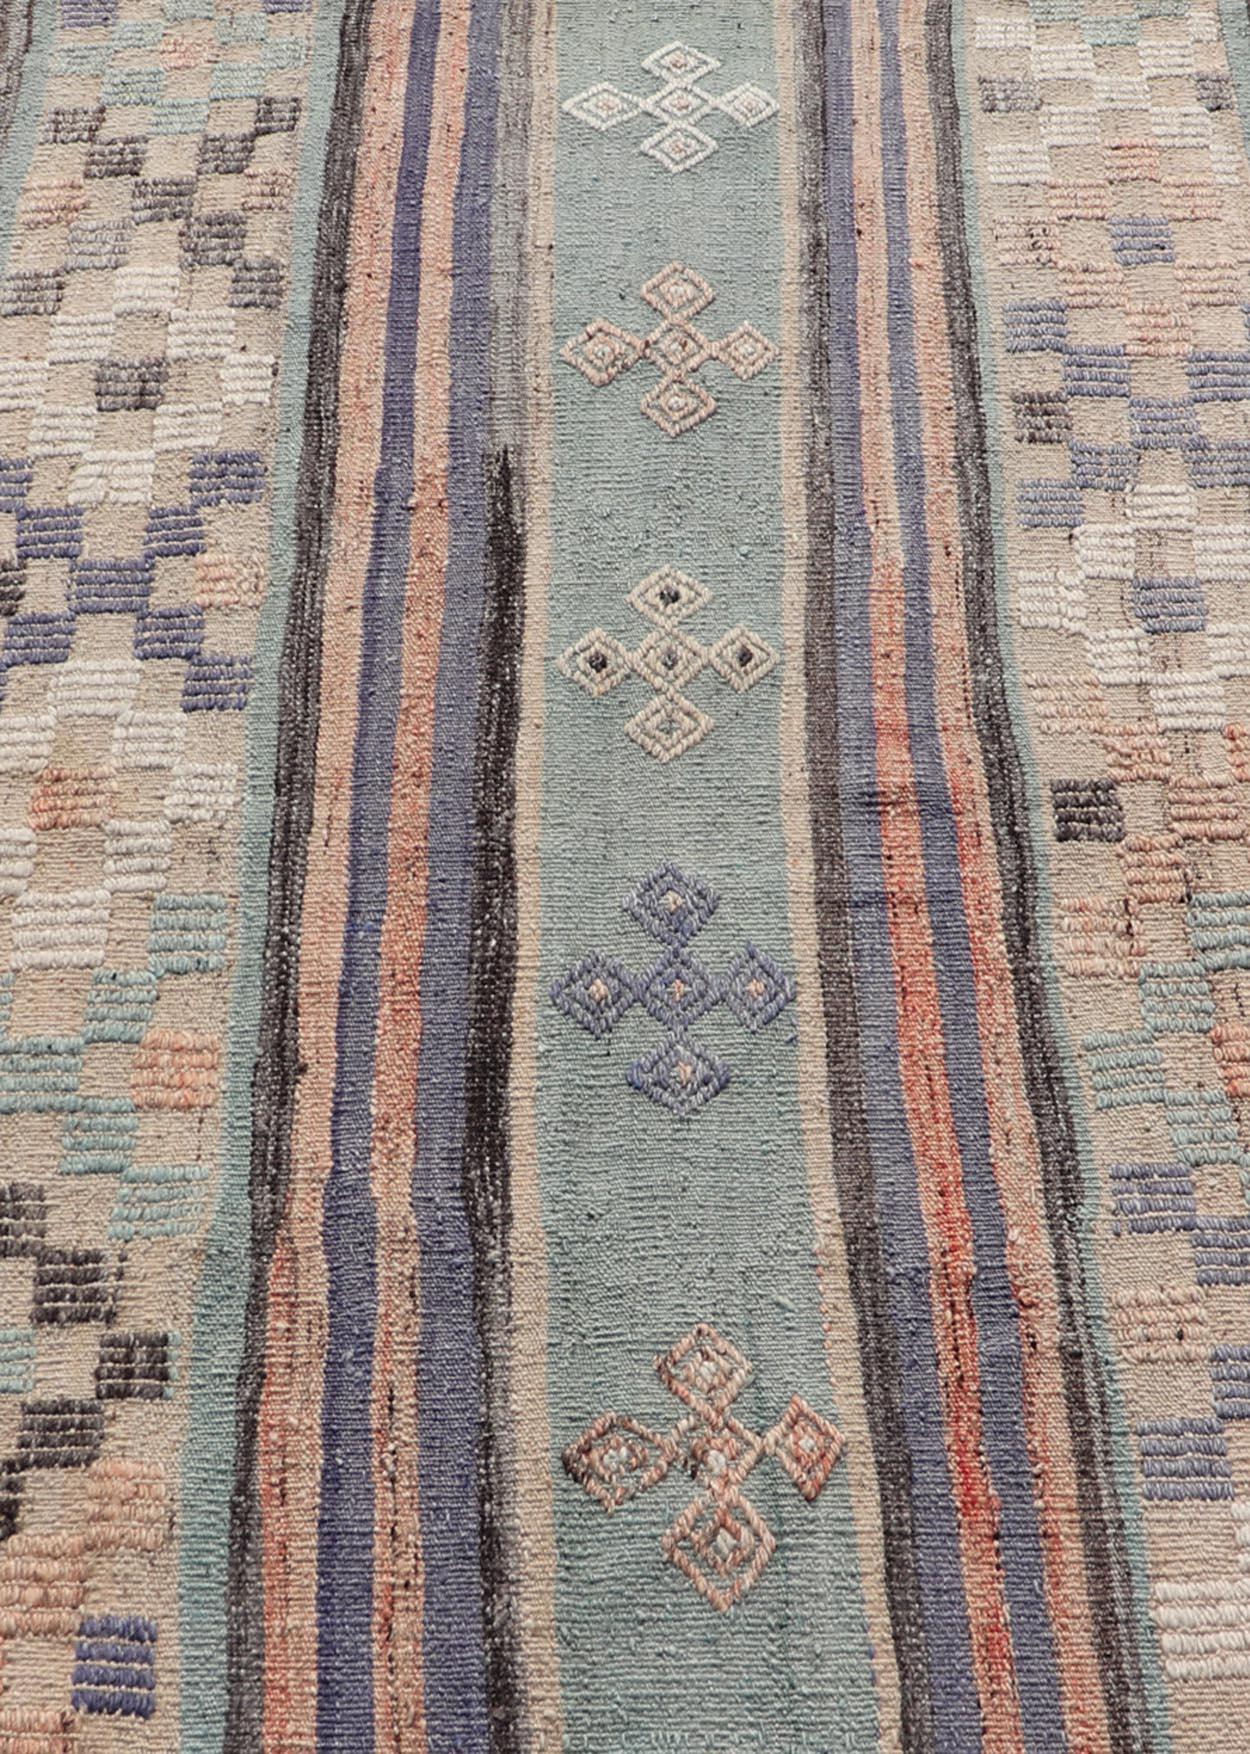 Wool Stripe Design Turkish Vintage Flat-Weave Rug in Light Green, Purple, and Peach For Sale